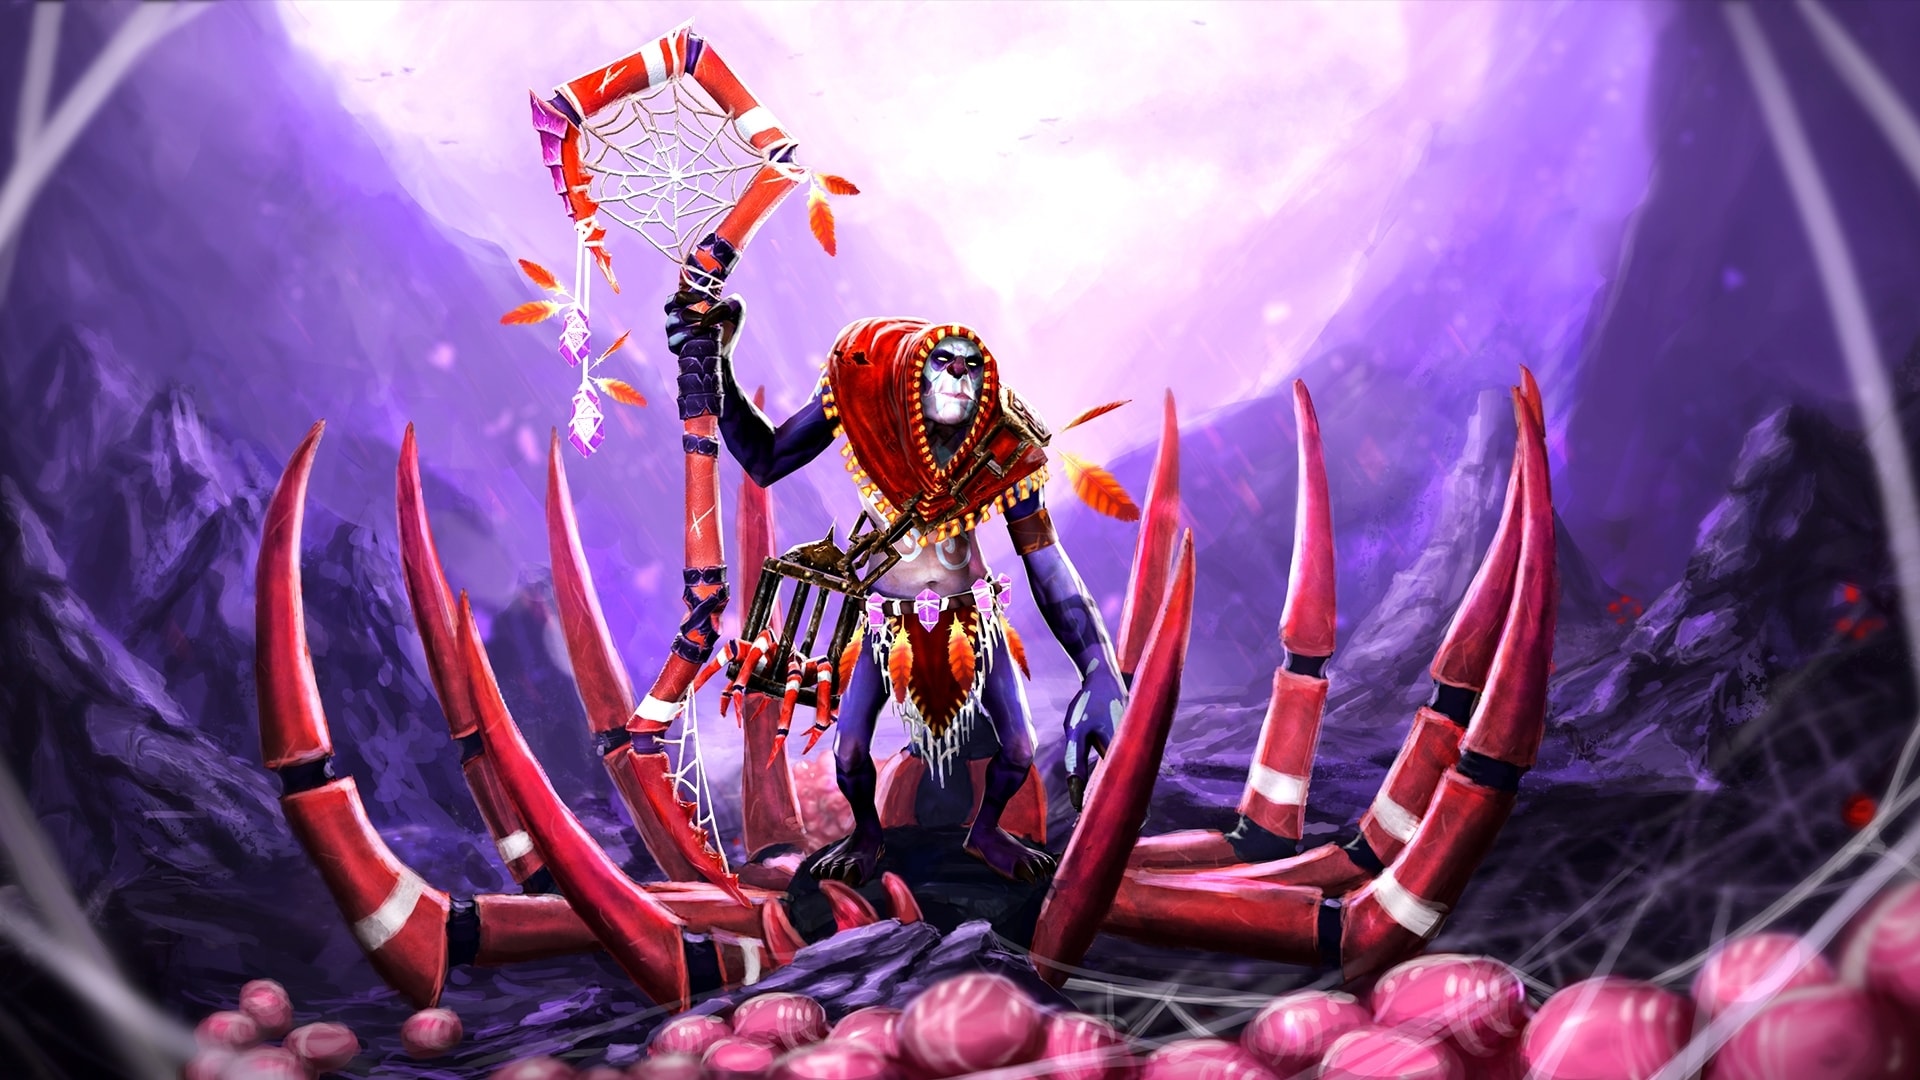 Witch Doctor Hd Pics - Witch Doctor Skill Dota 2 - HD Wallpaper 